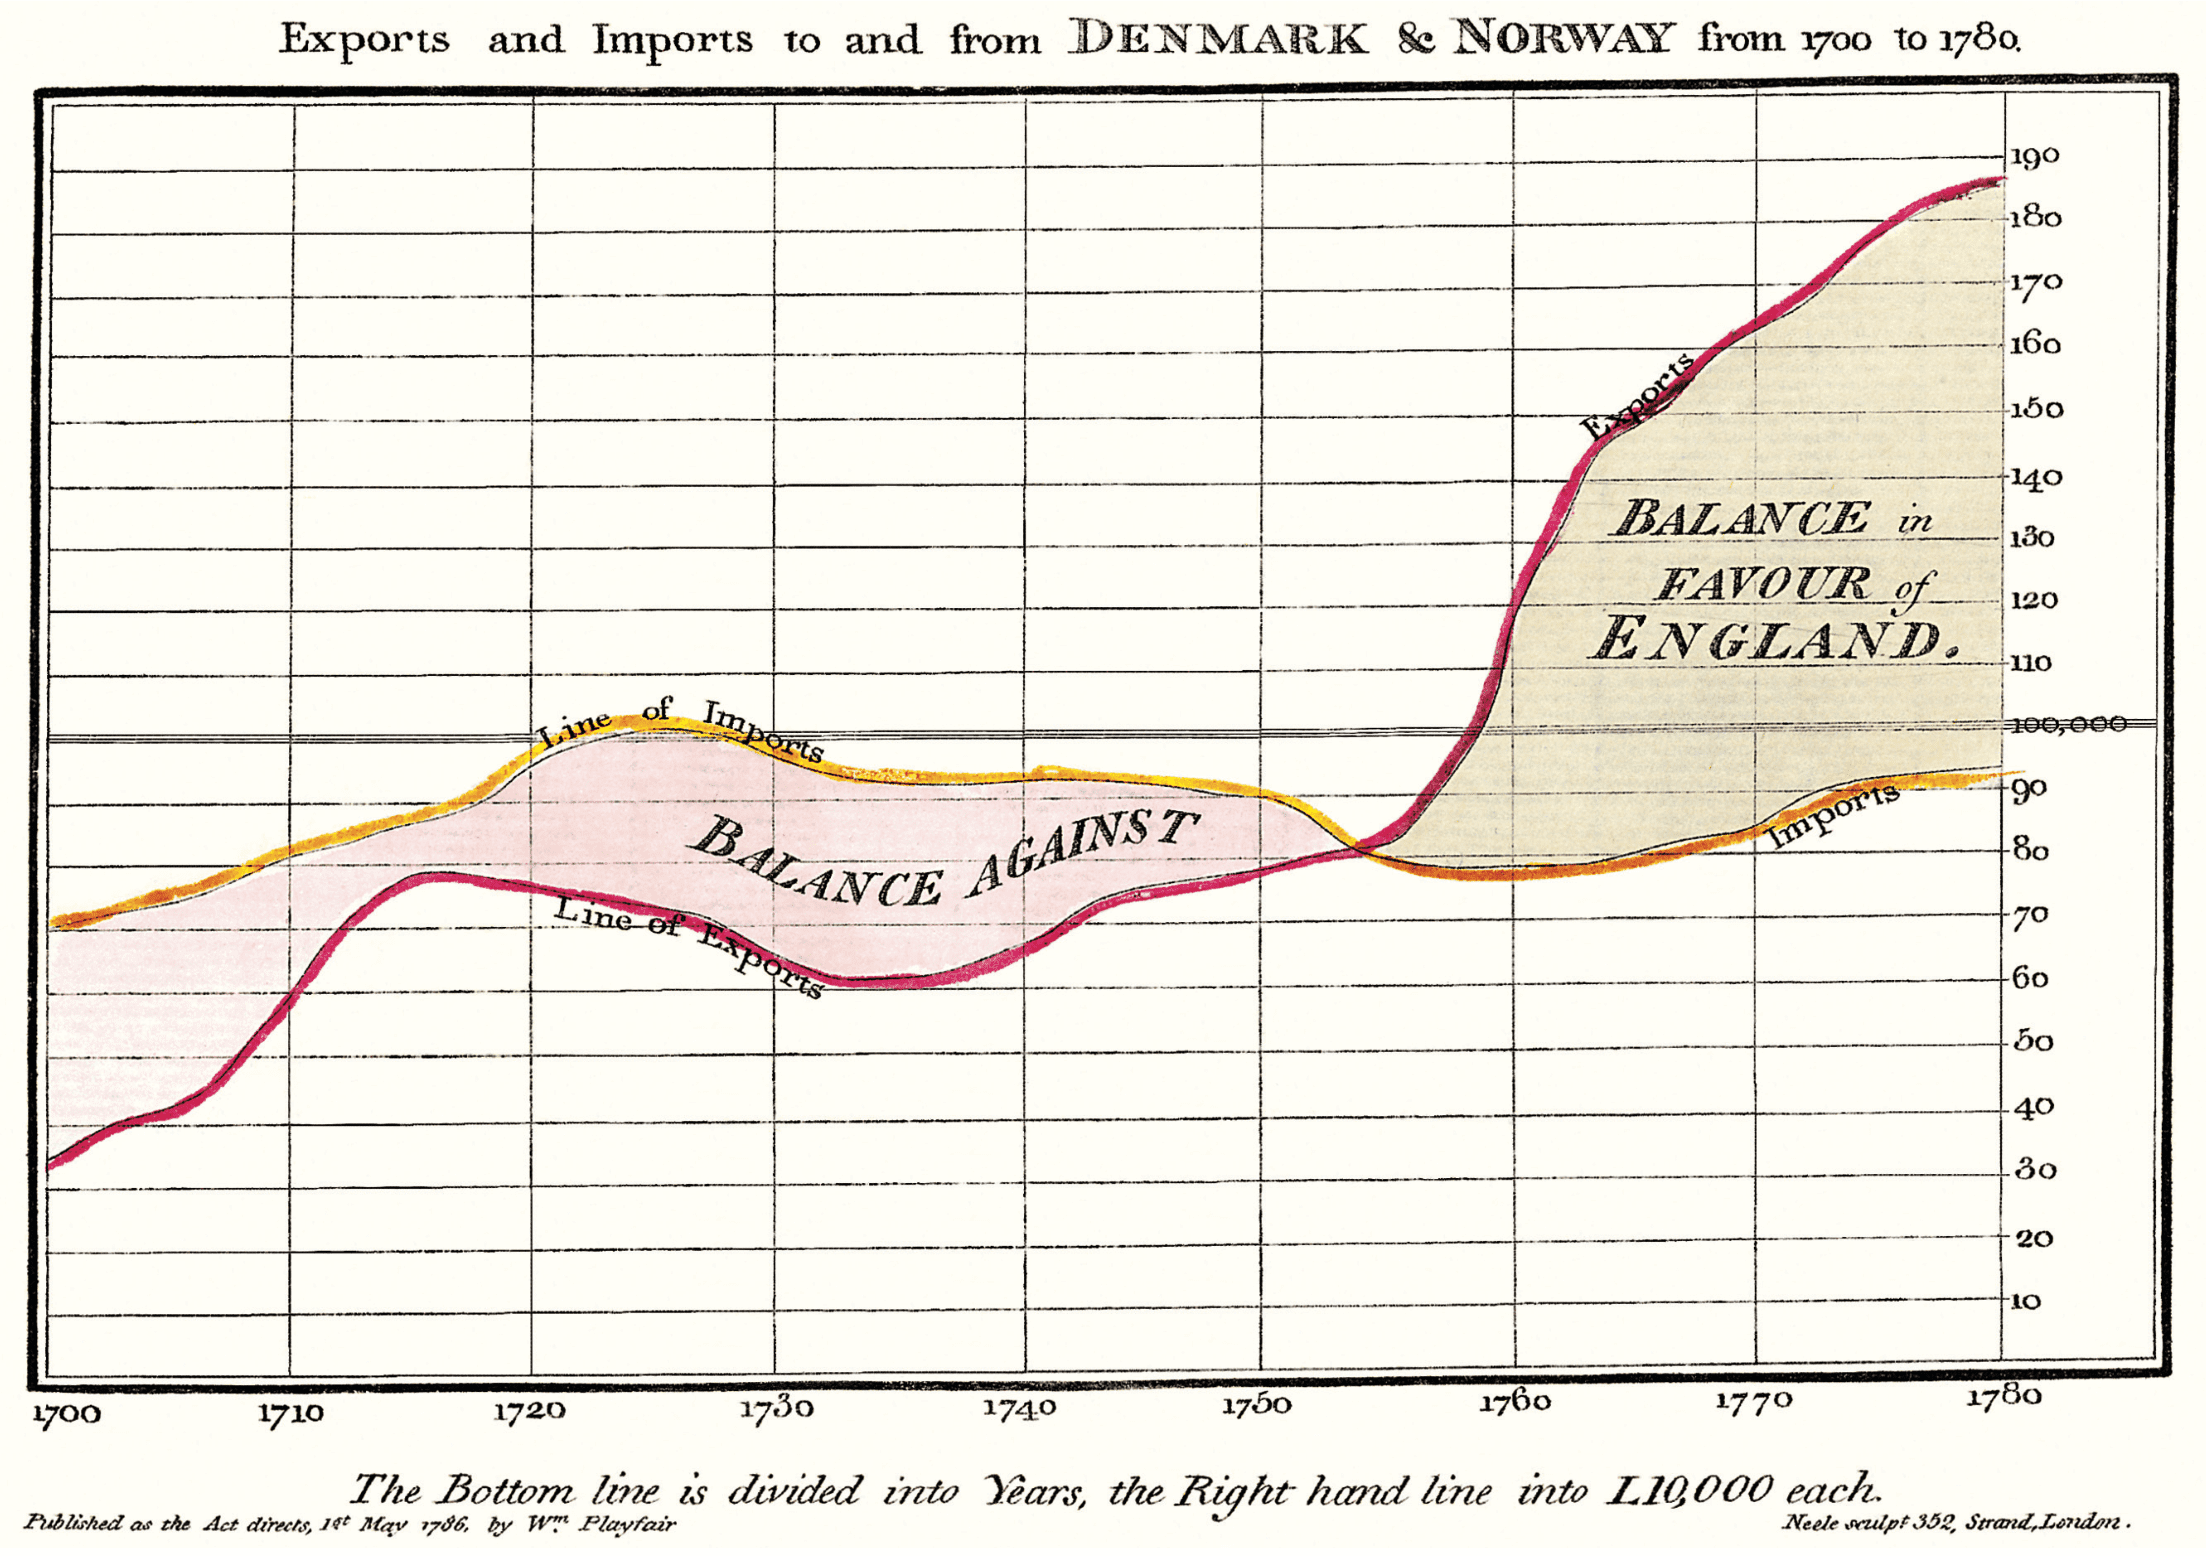 Exports and Imports to and from Denmark & Norway from 1700 to 1780